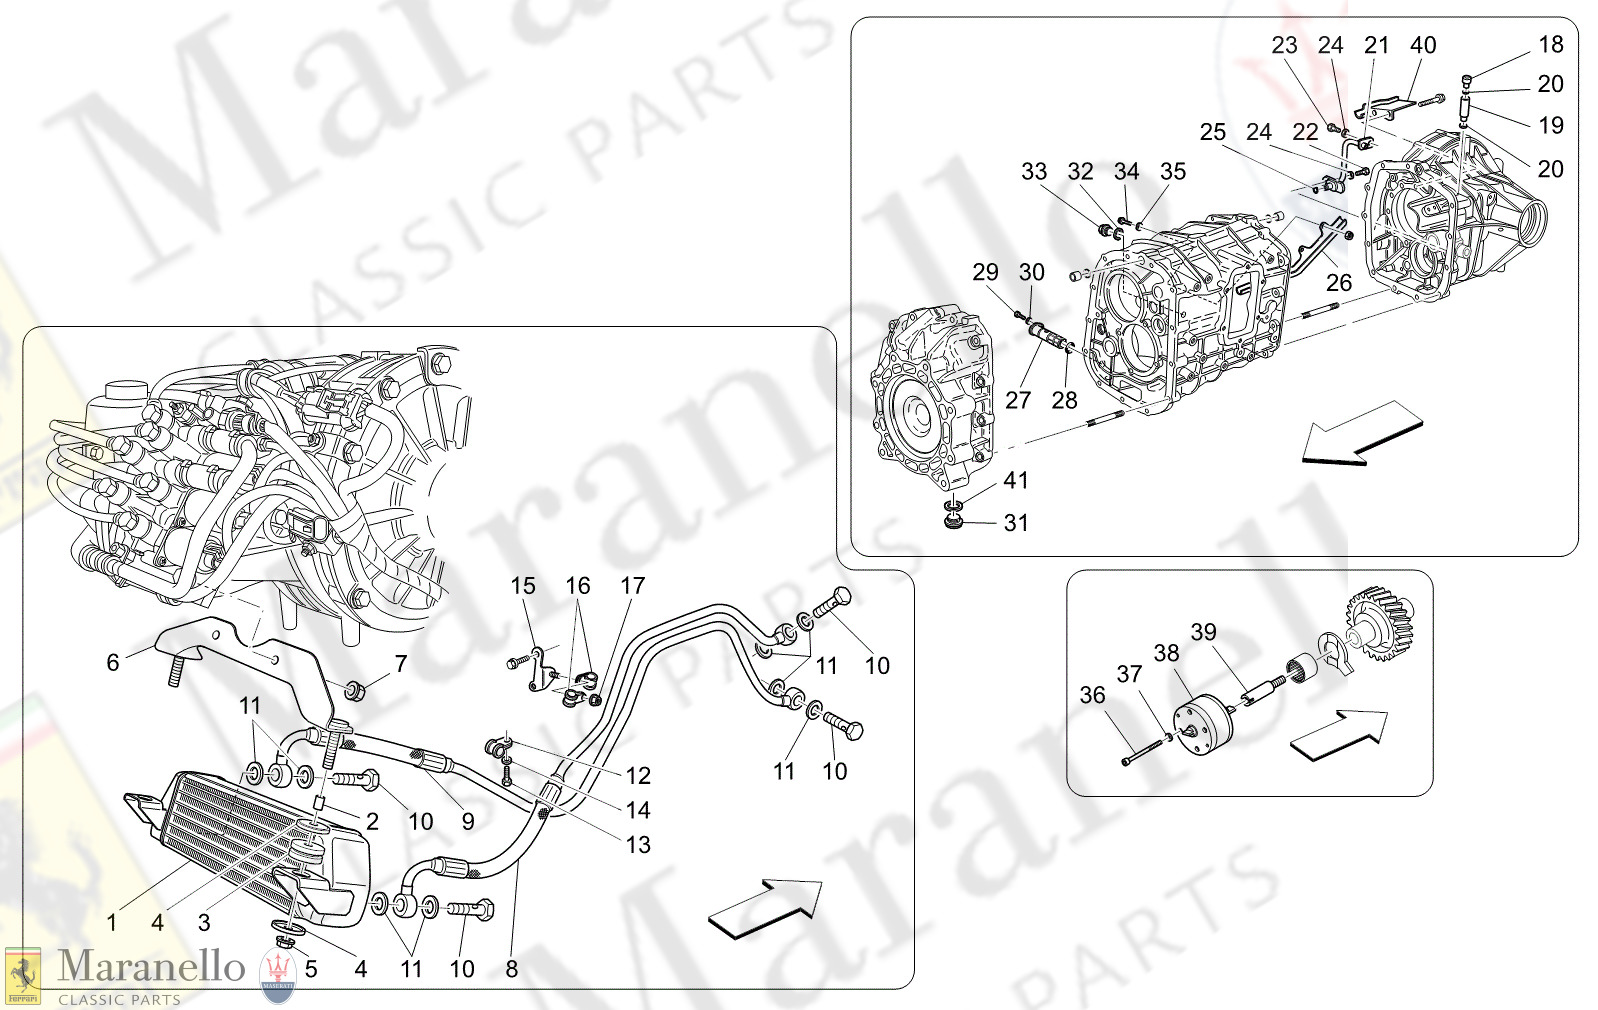 03.50 - 1 - 0350 - 1 Lubrication And Gearbox Oil Cooling